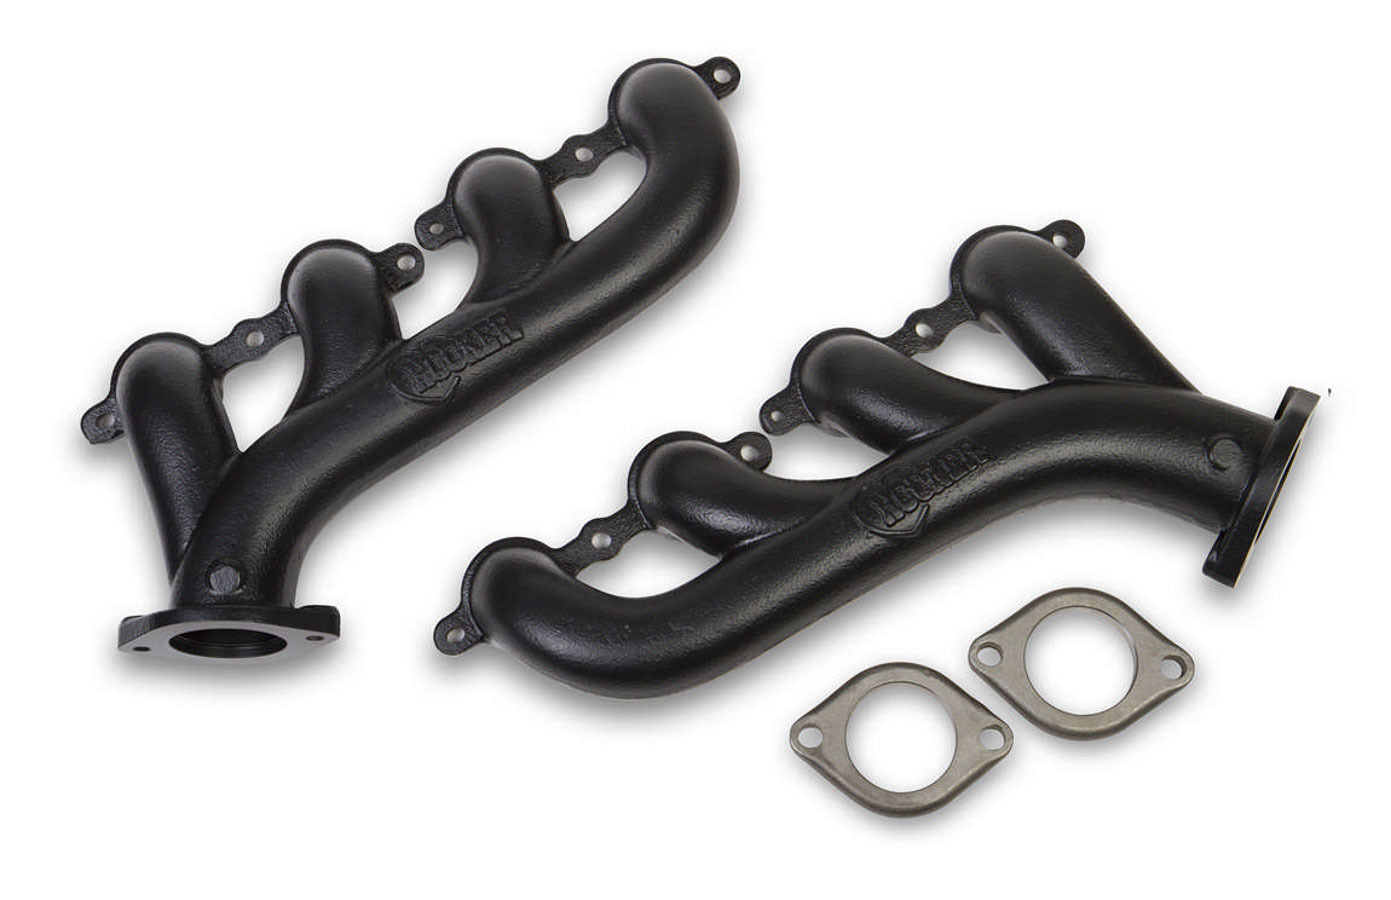 Hooker Headers 8501-3 Exhaust Manifold, LS Cast Iron, 2.25 in Outlet, Ductile Iron, Black Ceramic, GM LS-Series, Pair